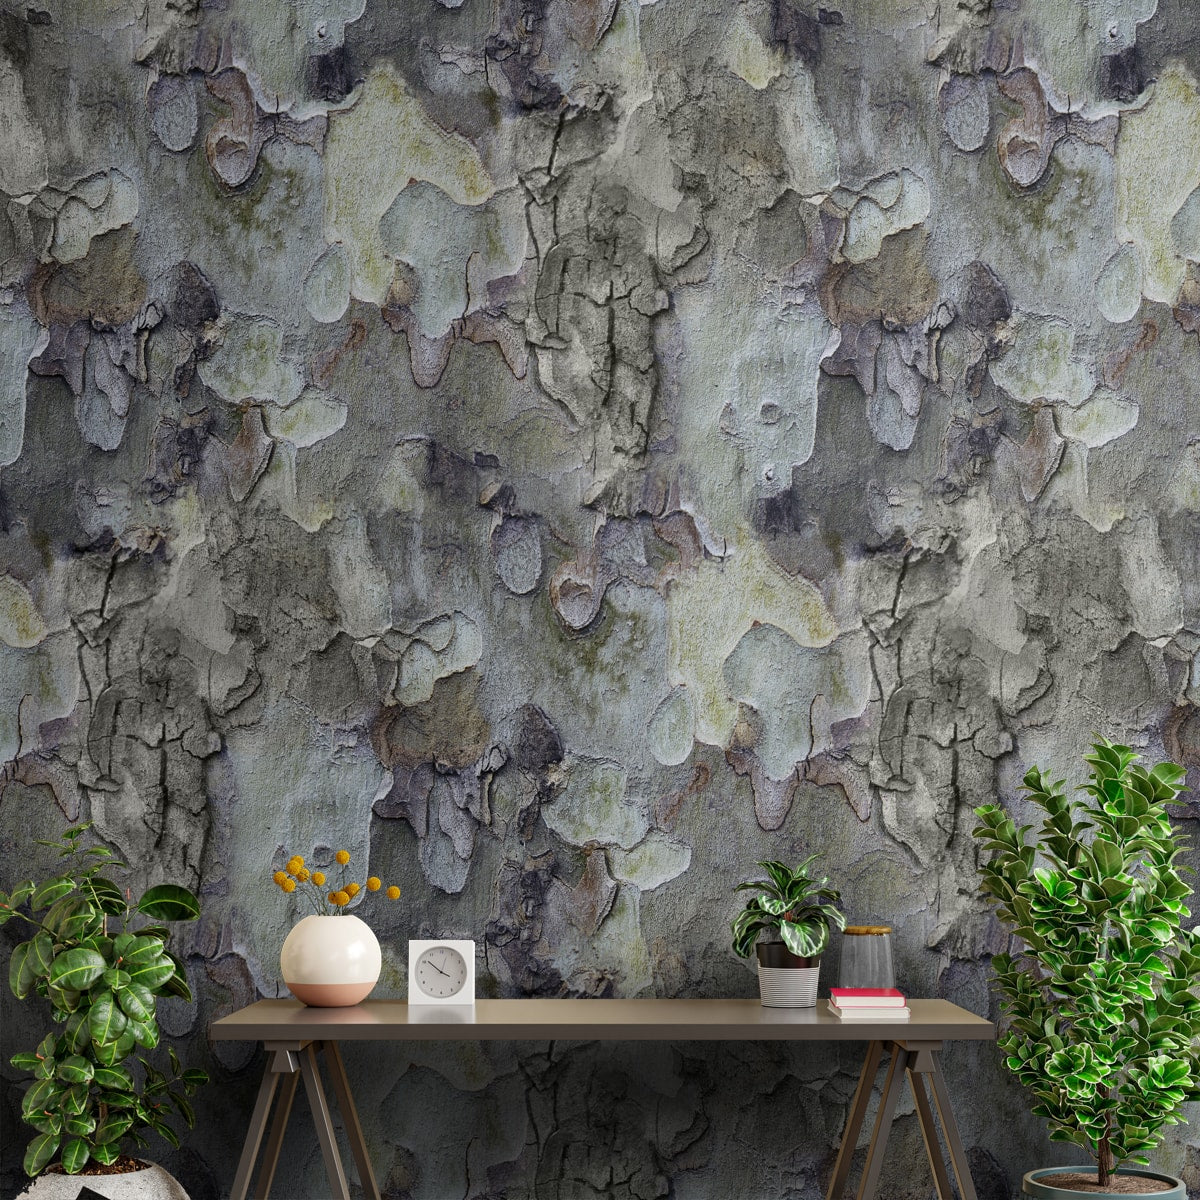 Distorted Paint Texture Themed Wallpaper for Walls – Life n Colors